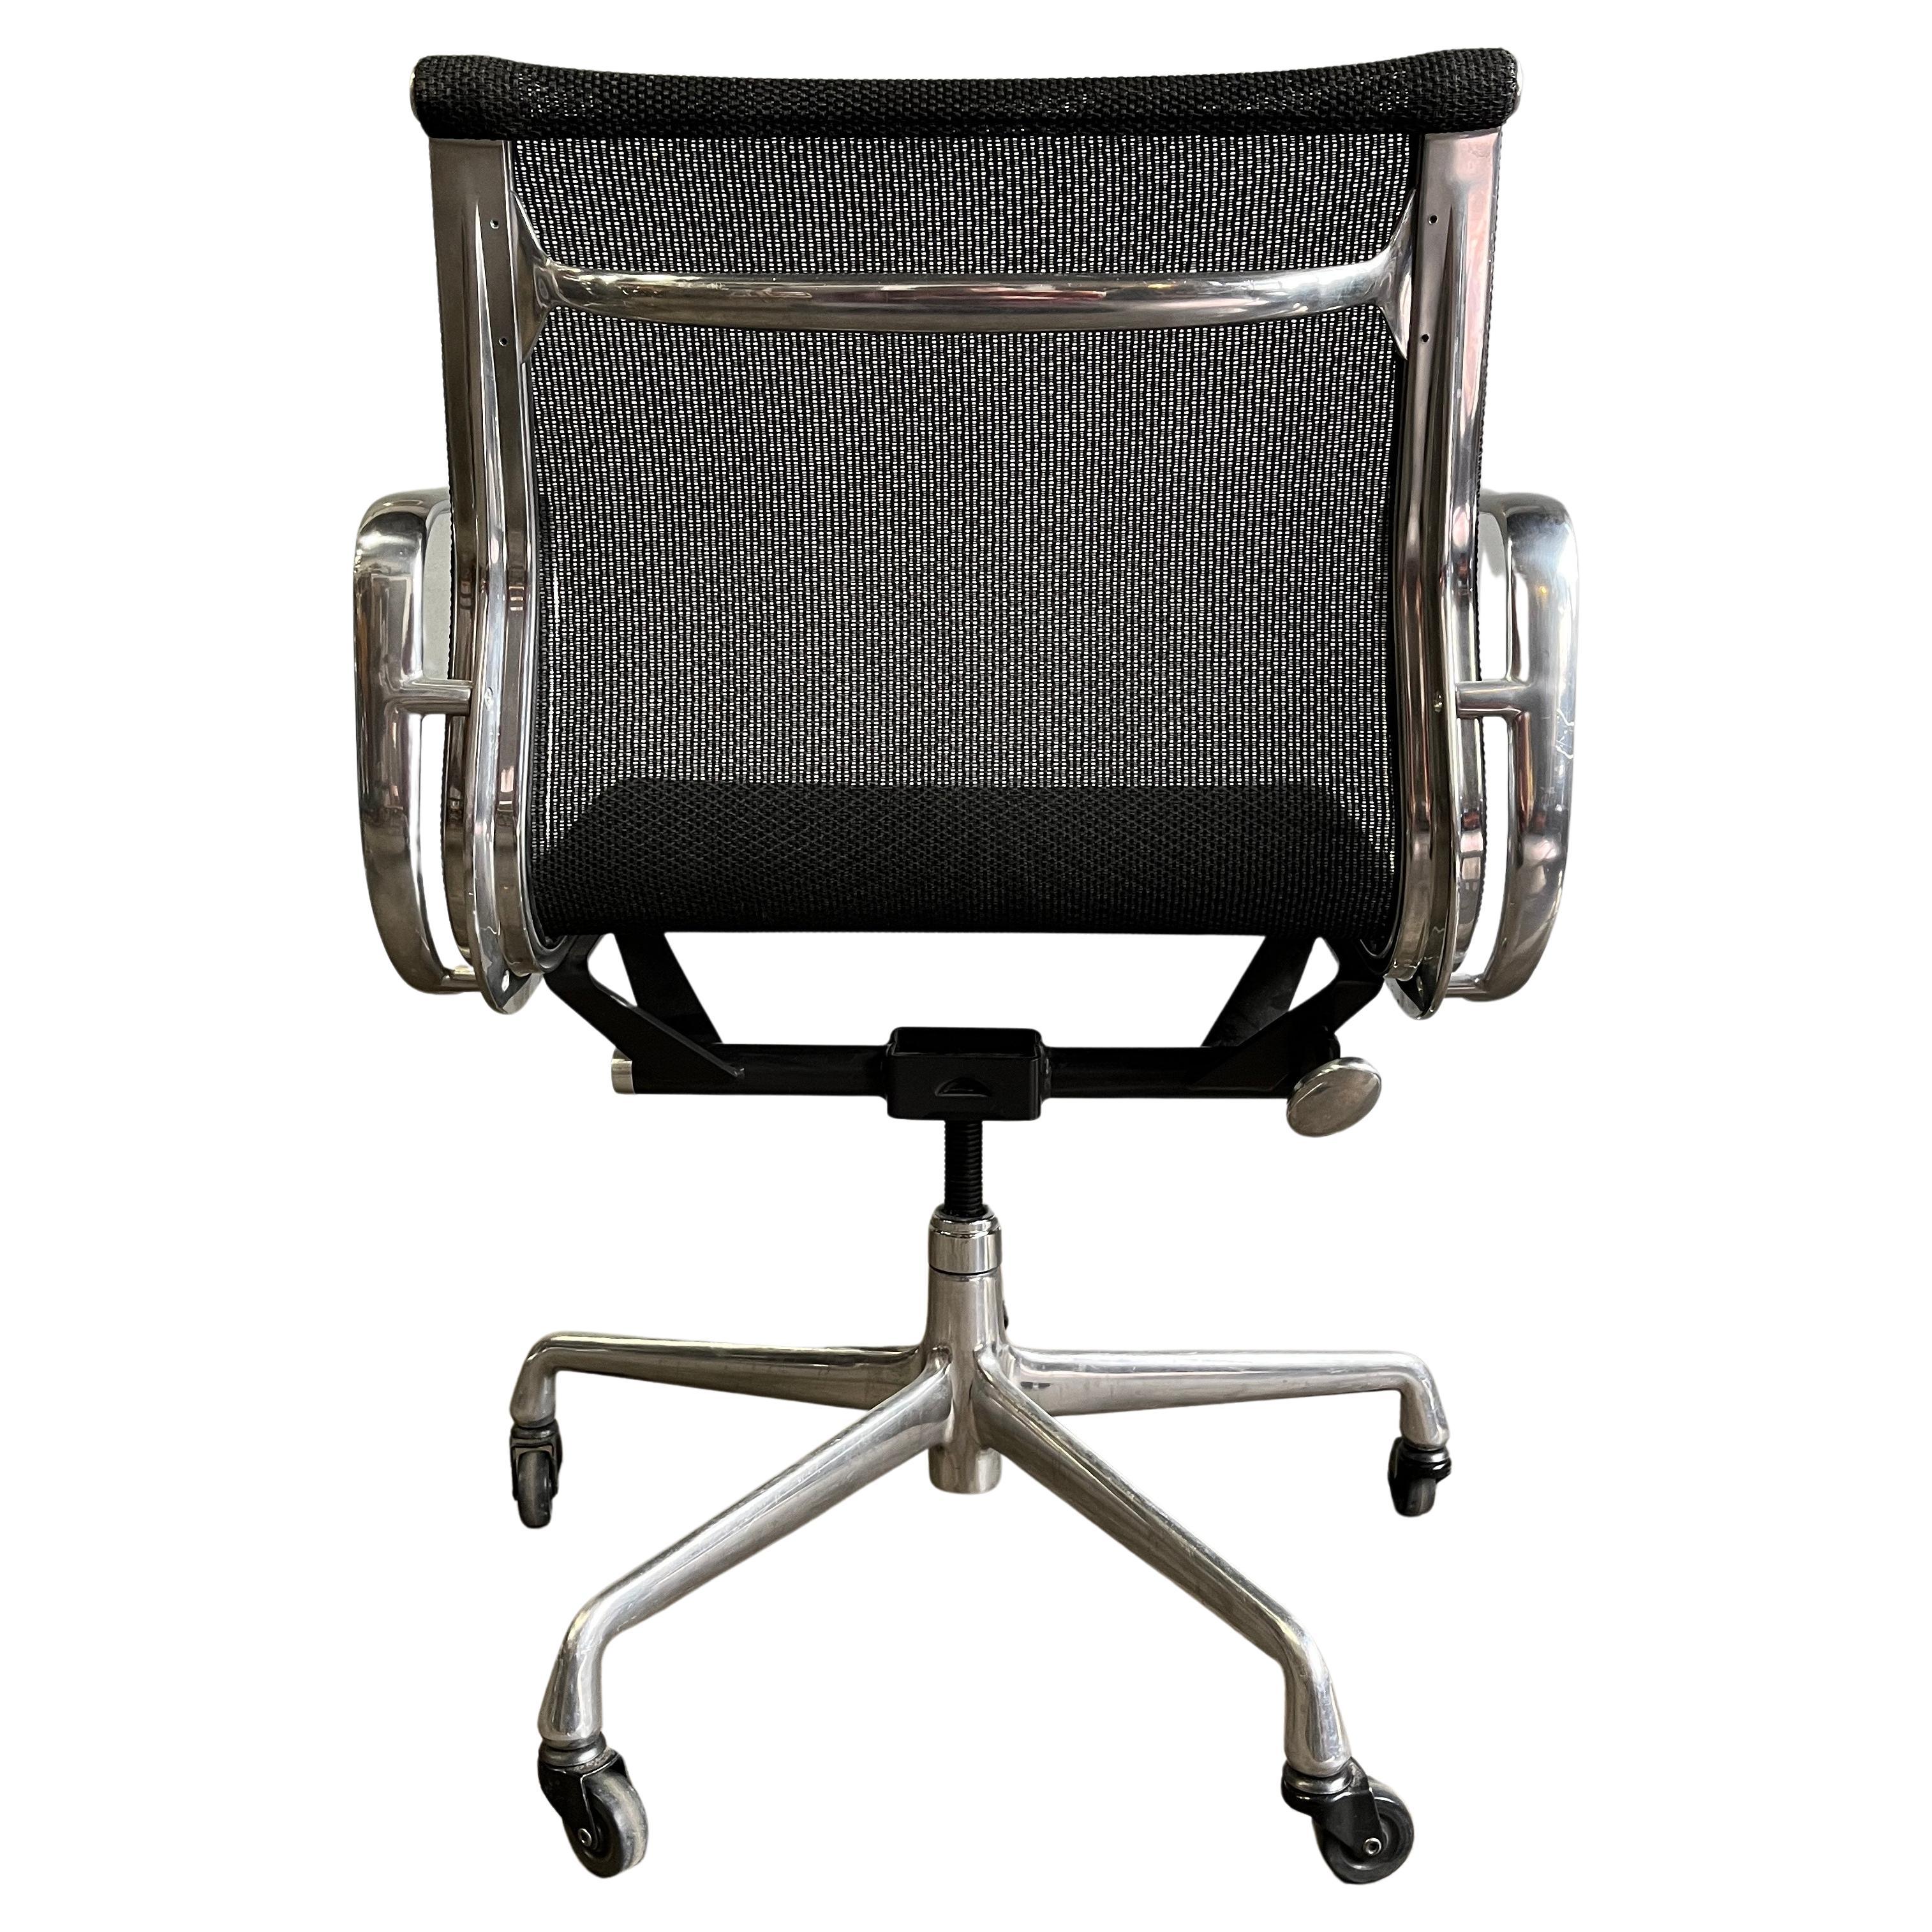 American Eames Aluminium Group Chairs for Herman Miller